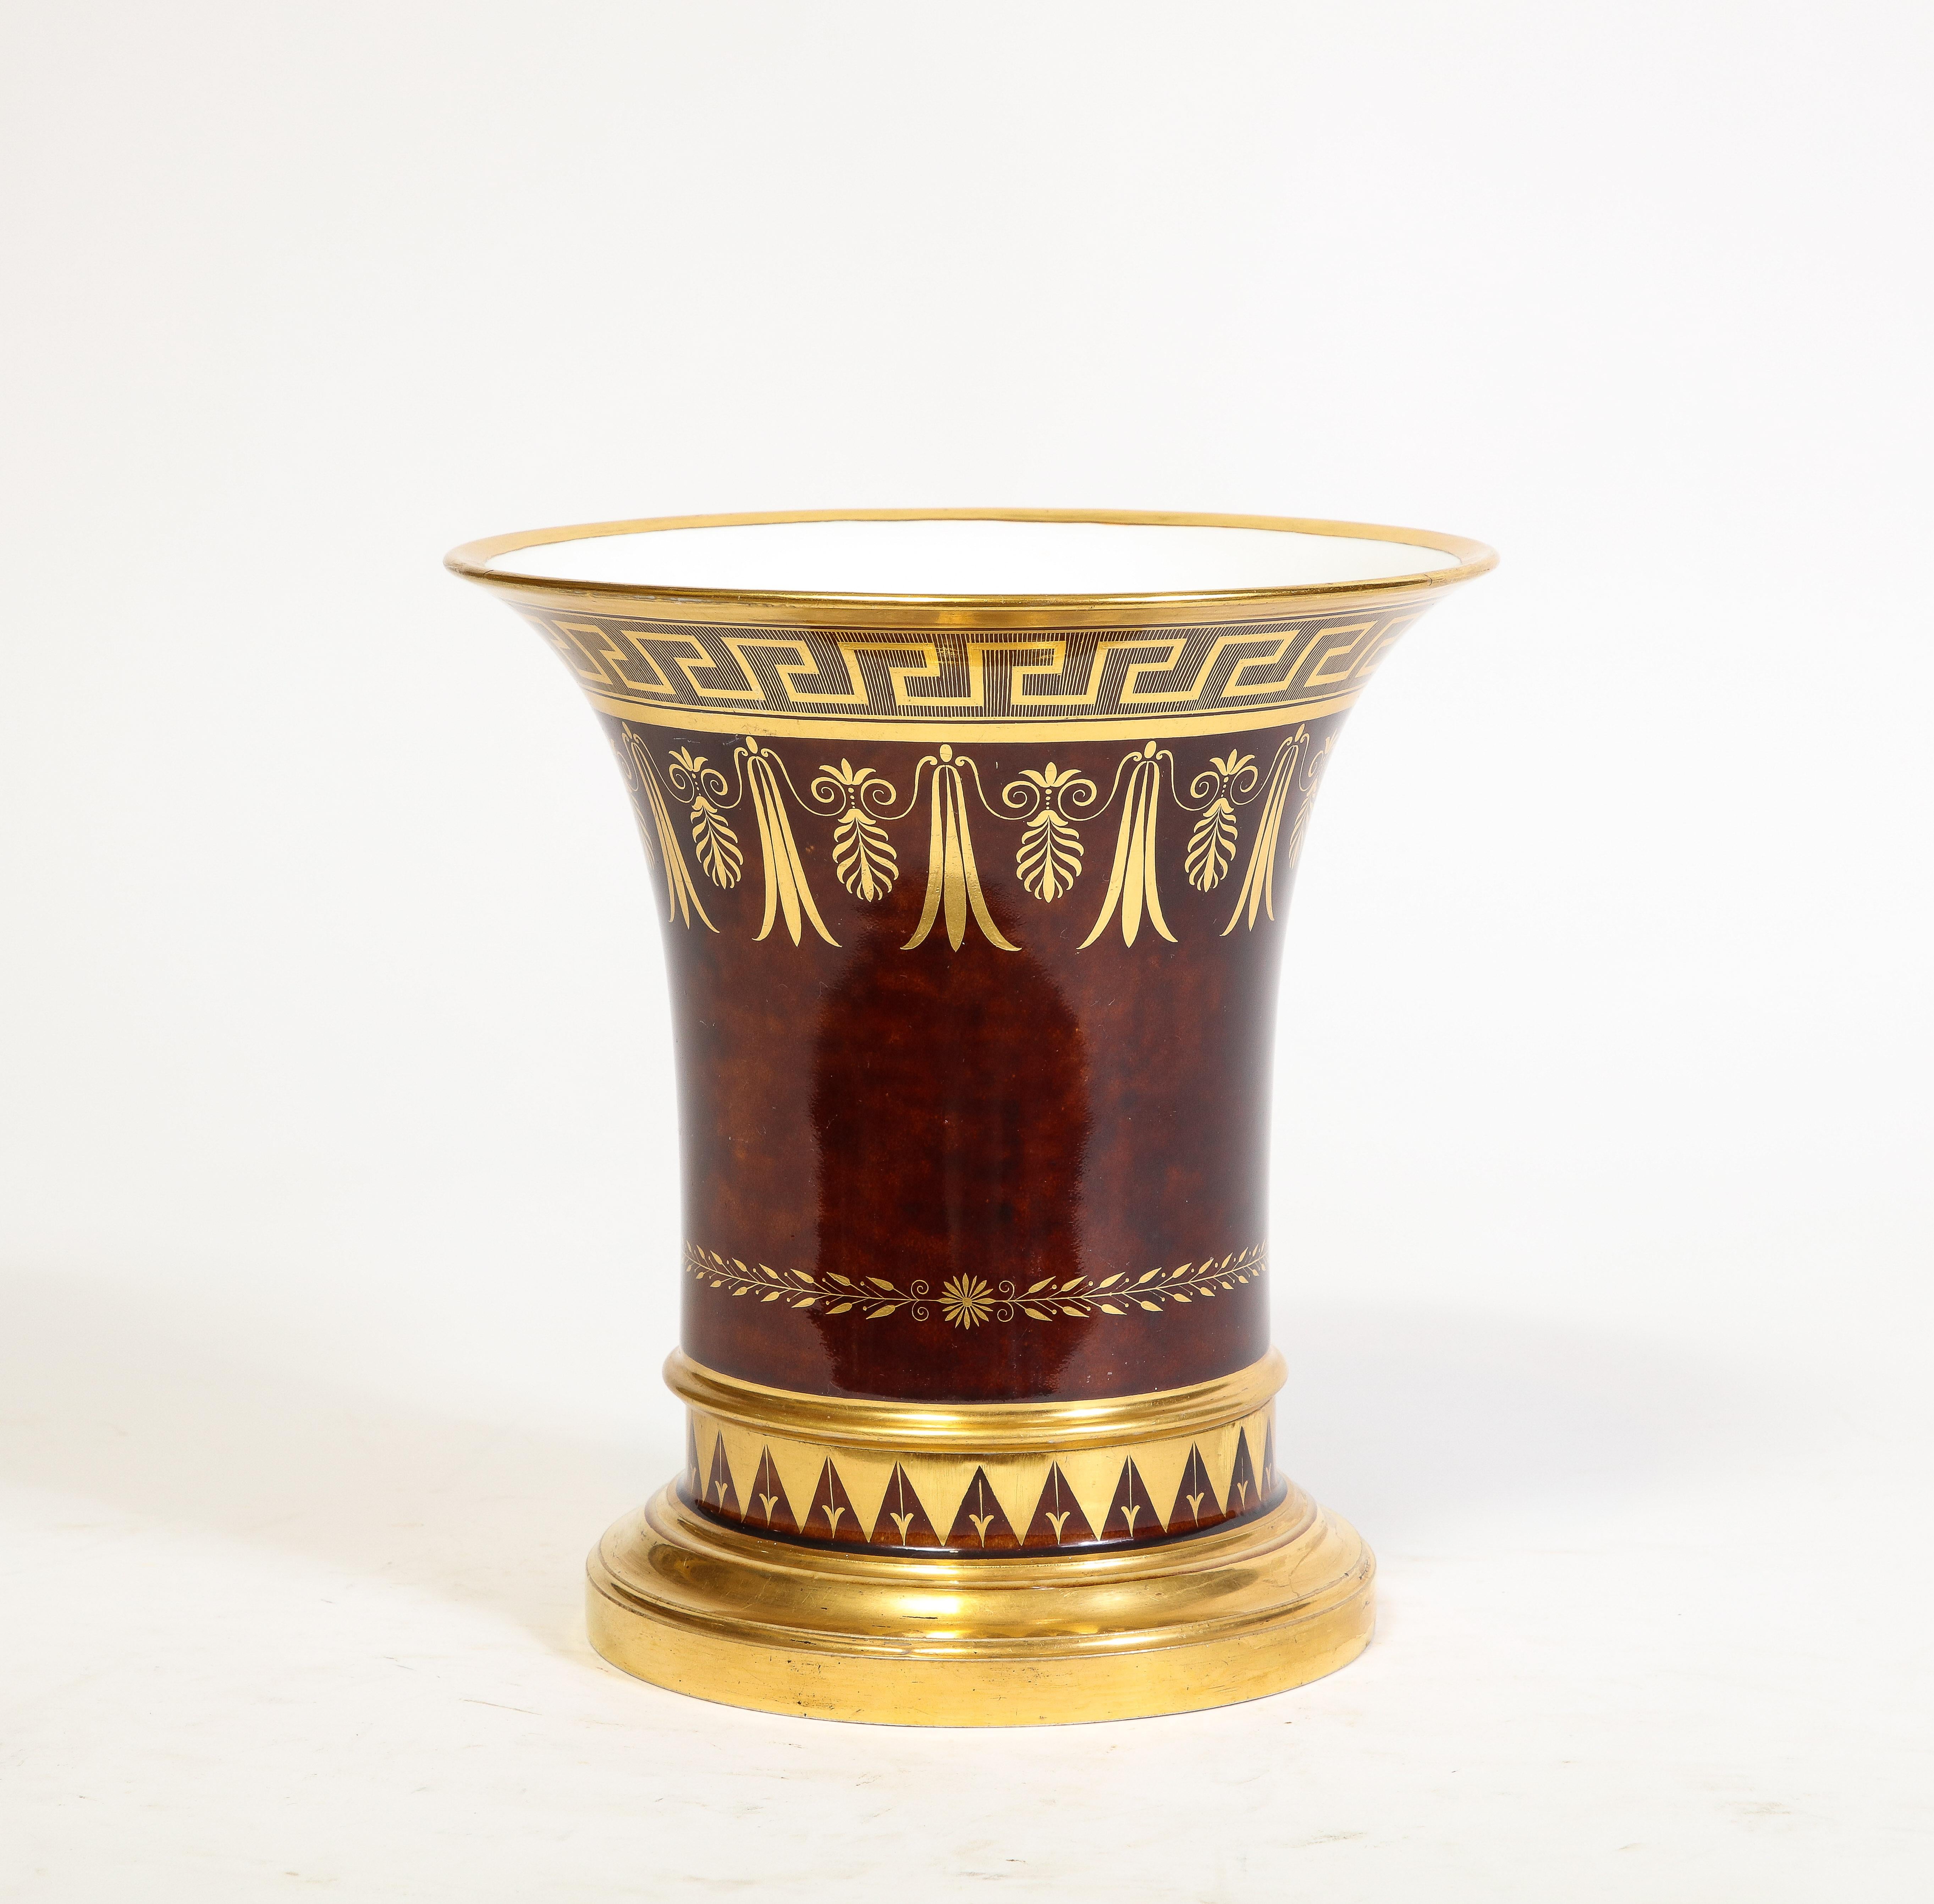 An Exceedingly Rare 19th Century French Sevres Faux Bois Flower-Pot and Underplate, Signed with Sevres Marks.  This stunning piece features a beautiful rounded rich handcrafted faux wood body, adorned with a gilt Greek Key-Scroll framed band